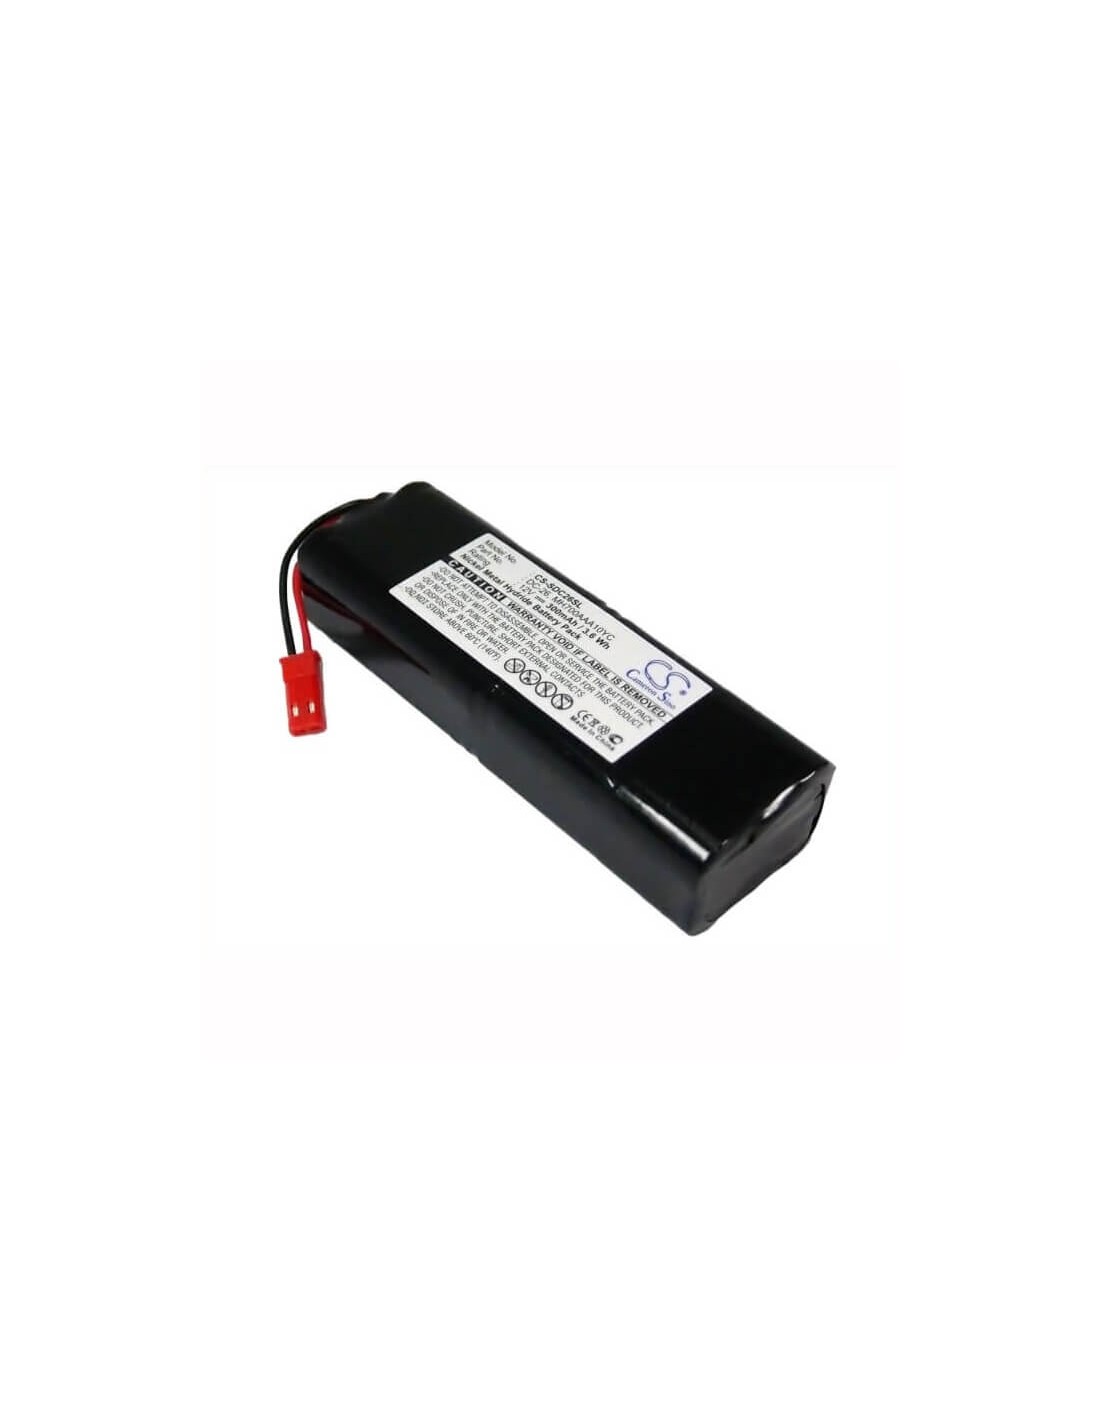 Battery for Kinetic Mh700aaa10yc 12.0V, 300mAh - 3.60Wh